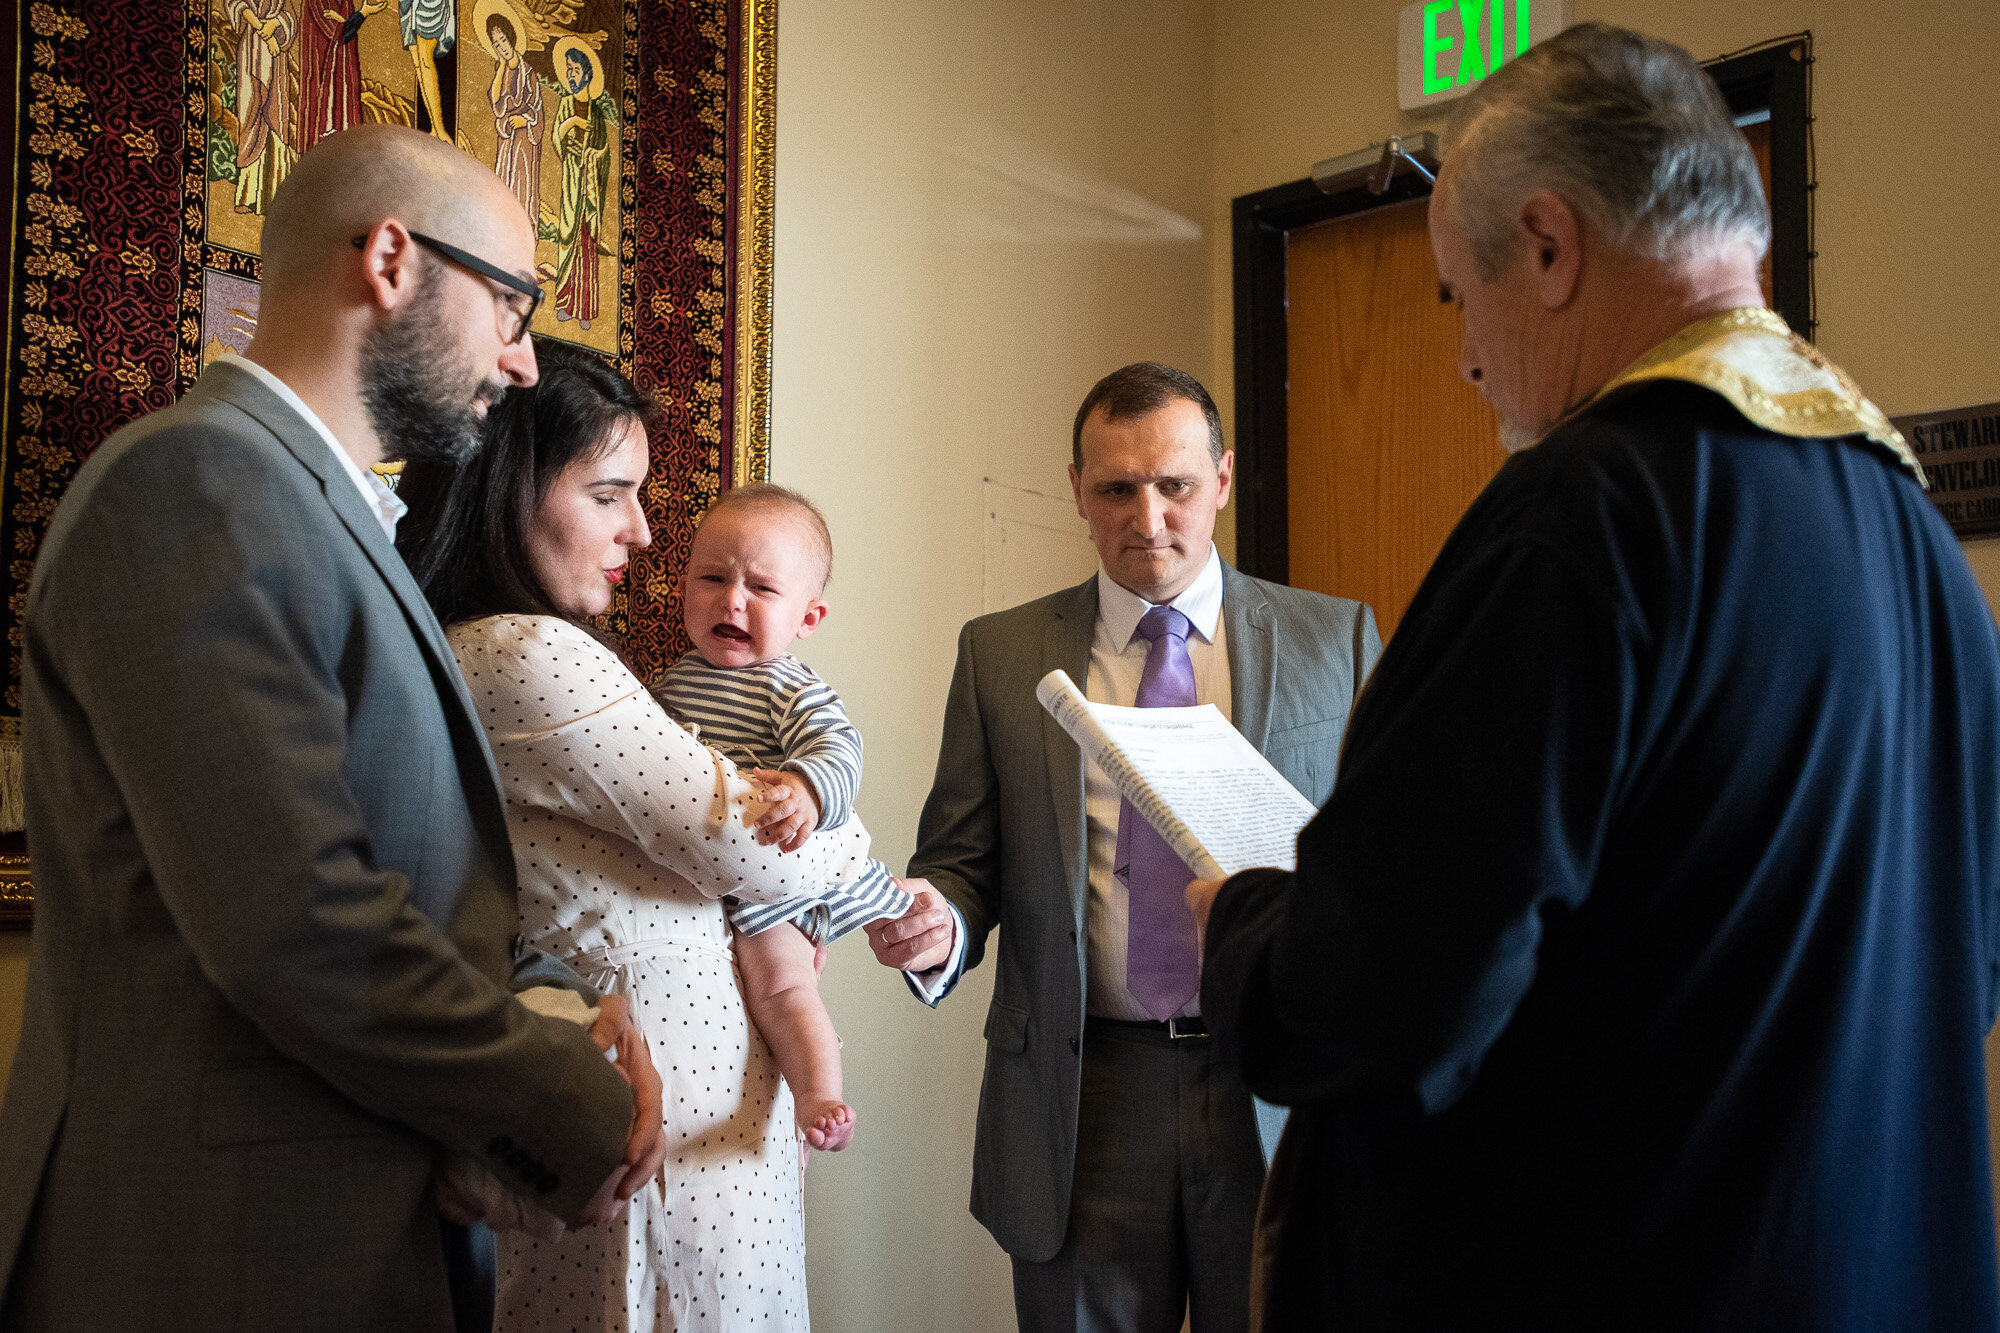 Mountain-View-Child-Baptism-Photography-family-1-2.jpg